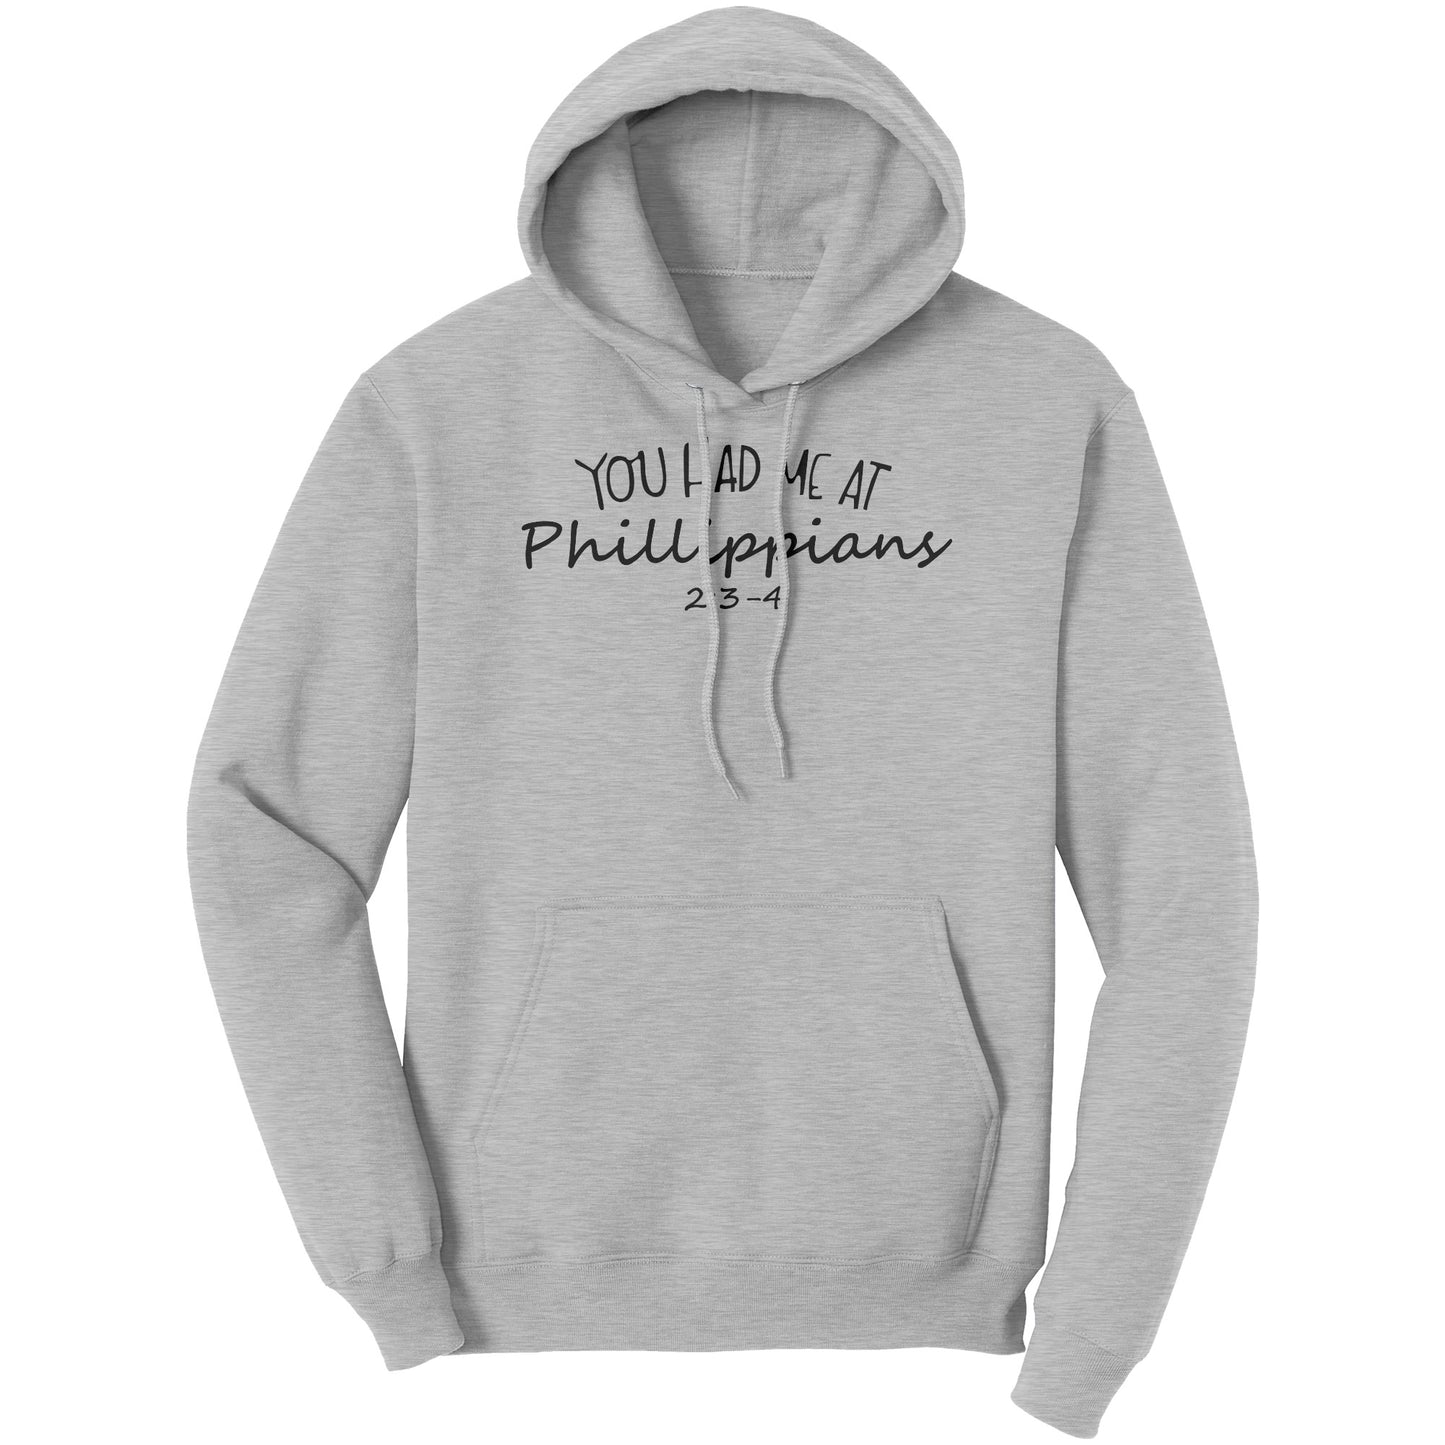 You Had Me At Philippians 2:3-4 Hoodie Part 1